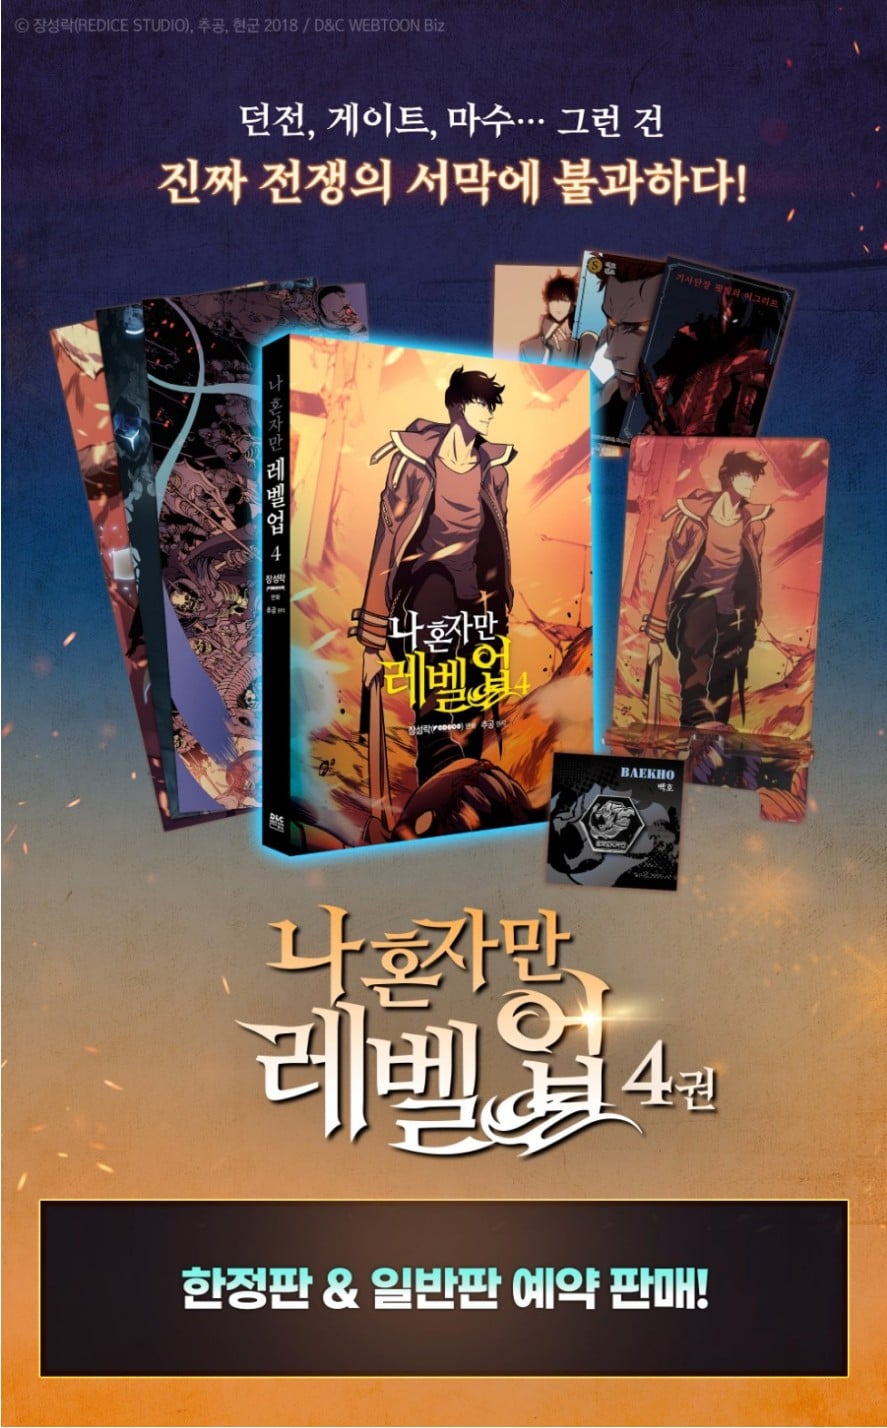 Solo Leveling Volume 4 (korean) has arrived! : r/sololeveling